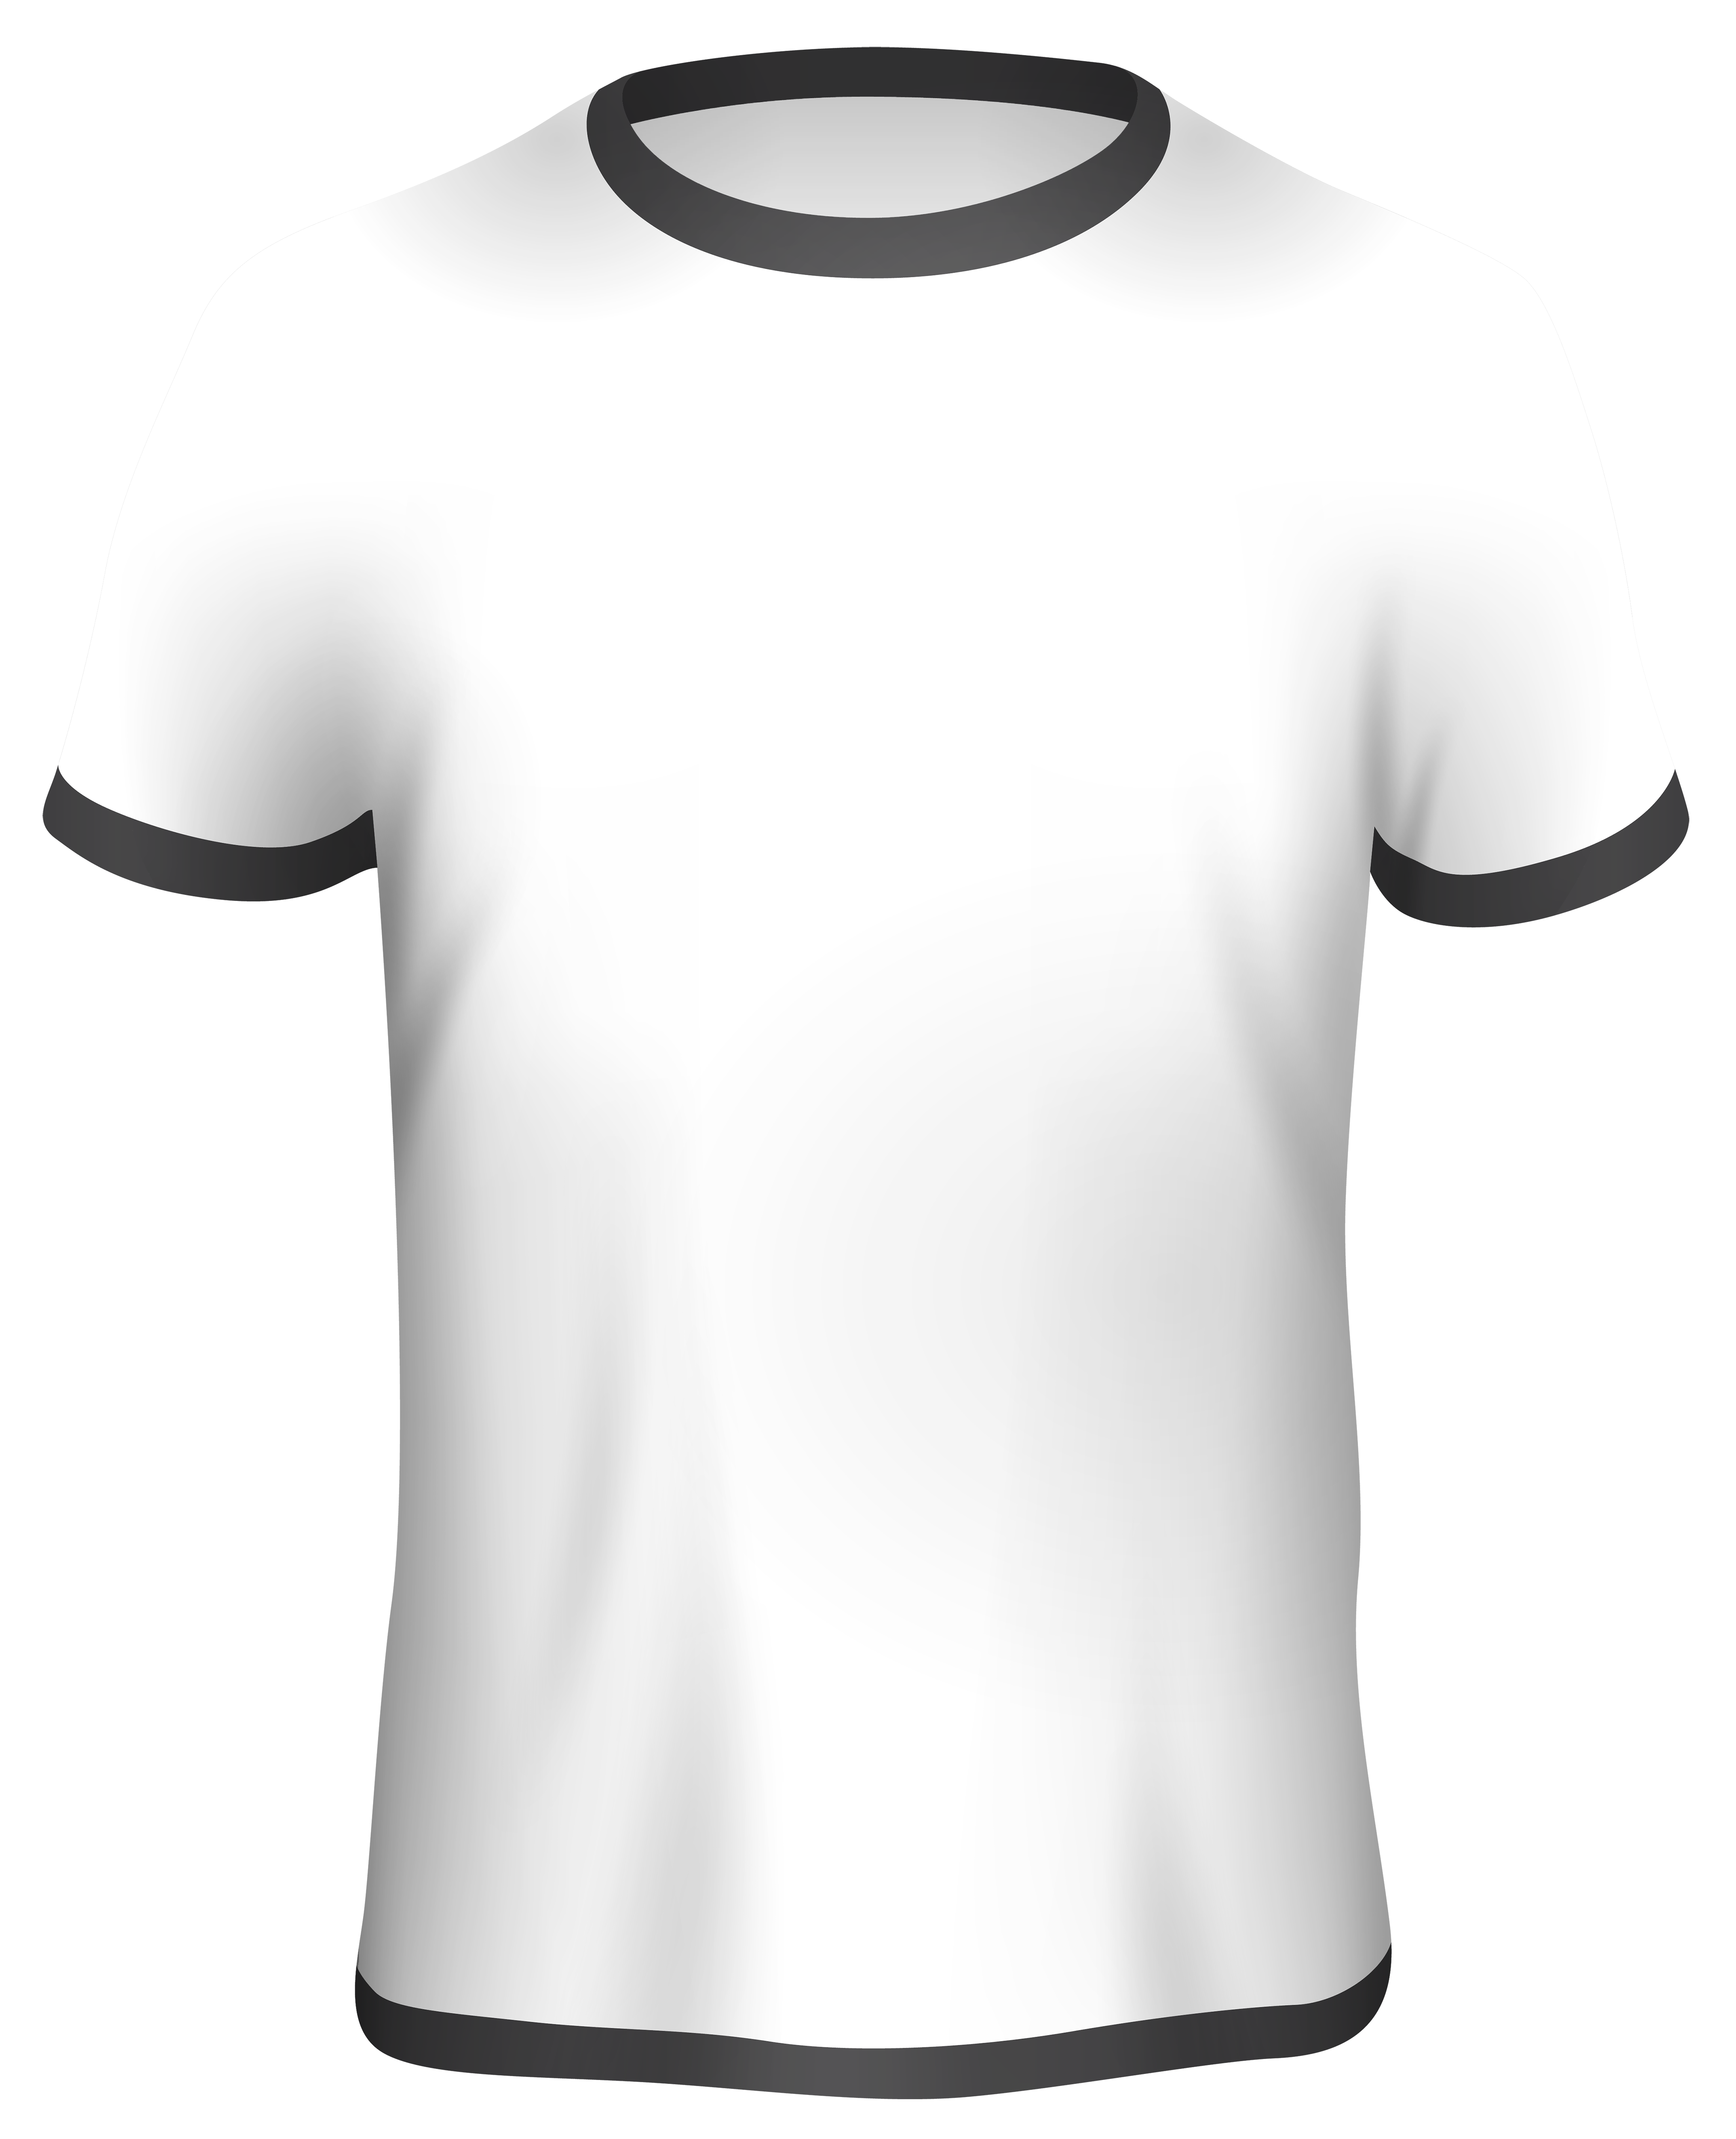 Male white png best. Shirt clipart top